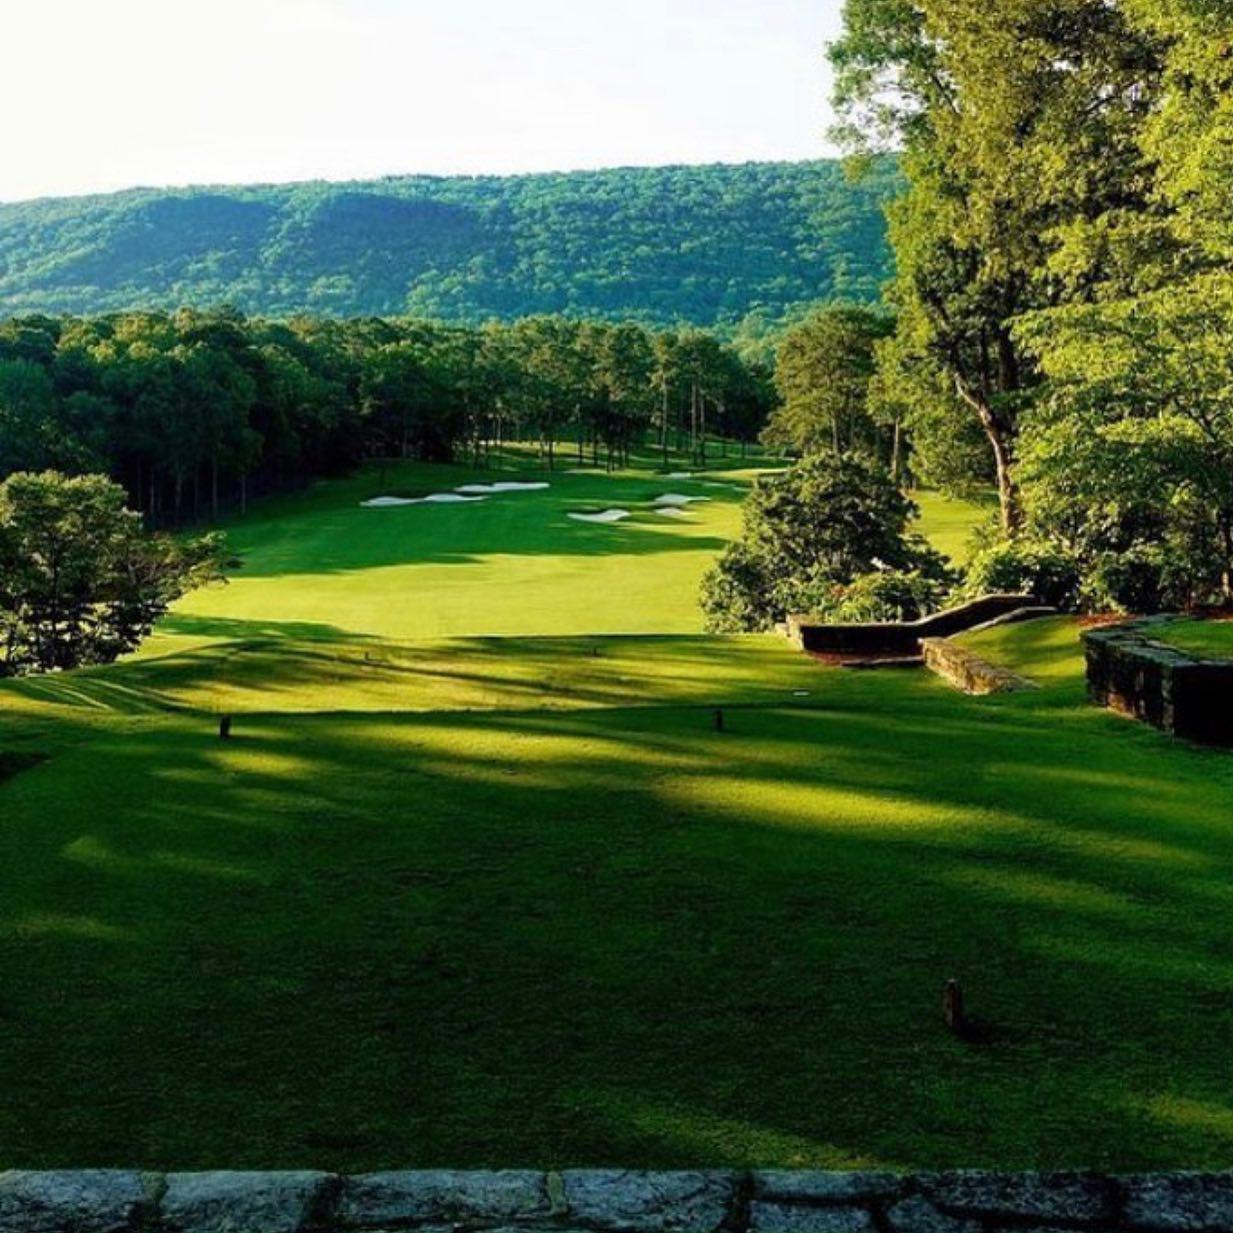 Landscape view at Shoal Creek Properties of green grass and trees